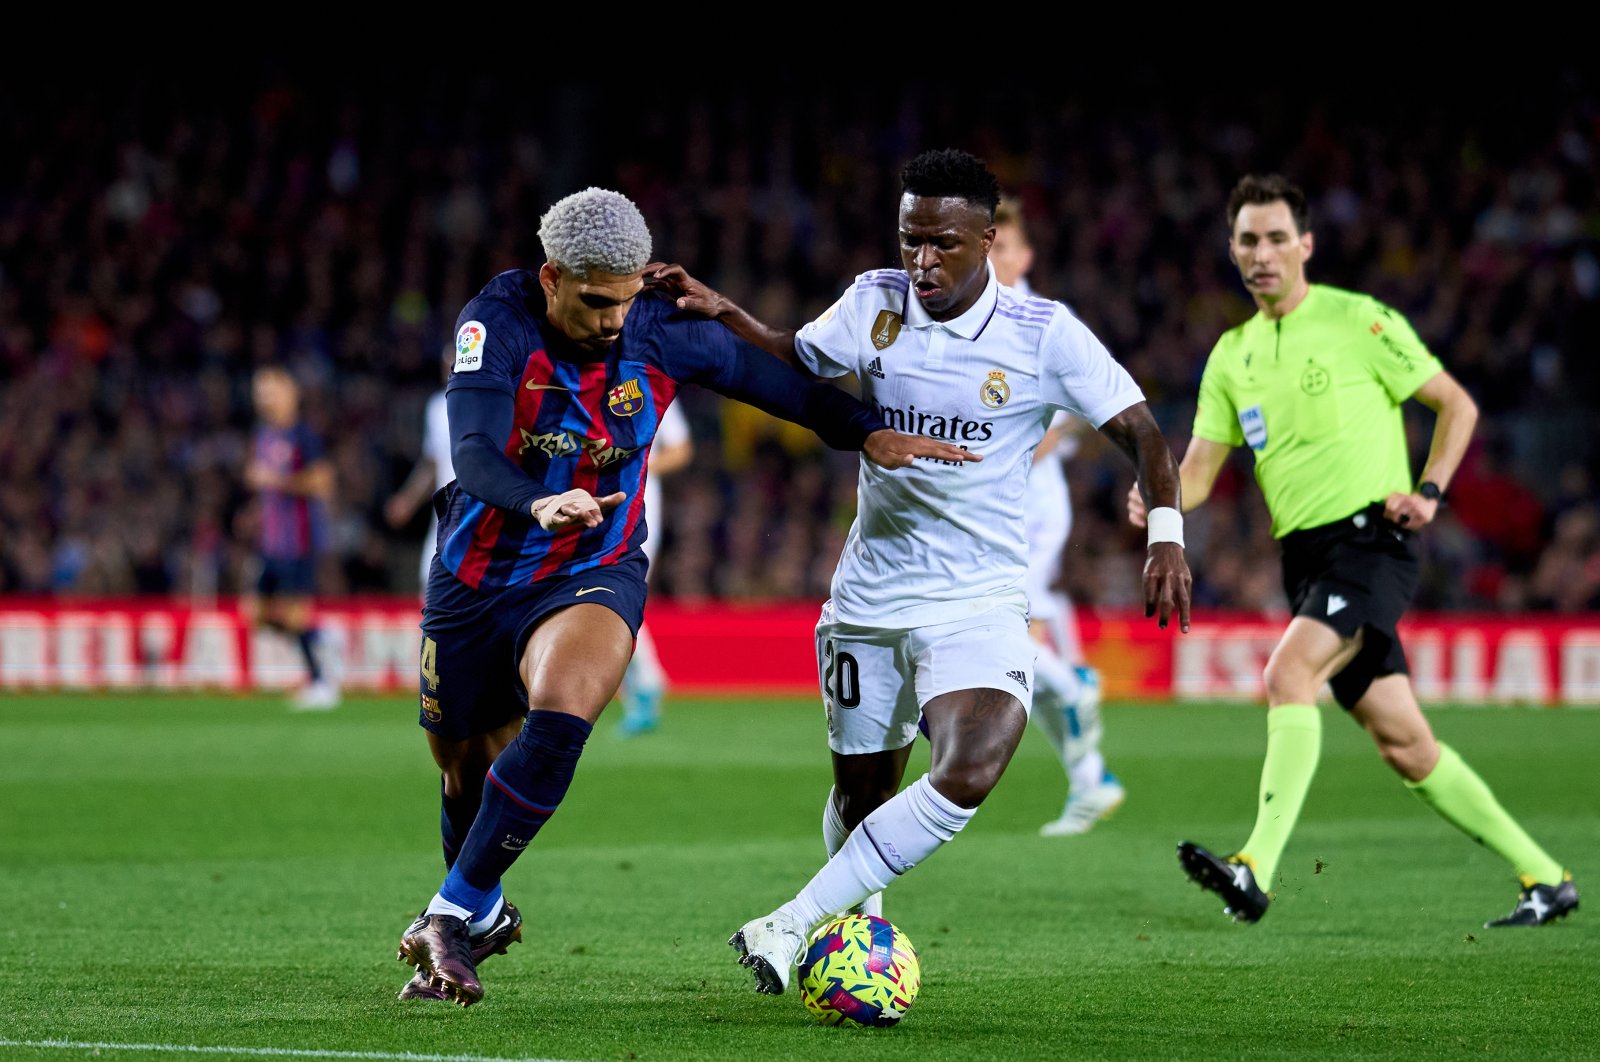 Real Madrid&#039;s Vinicius Junior (R) in action with Barcelona&#039;s Ronald Araujo during the La Liga match at the Camp Nou, Barcelona, Spain, March 19, 2023. (Getty Images Photo)